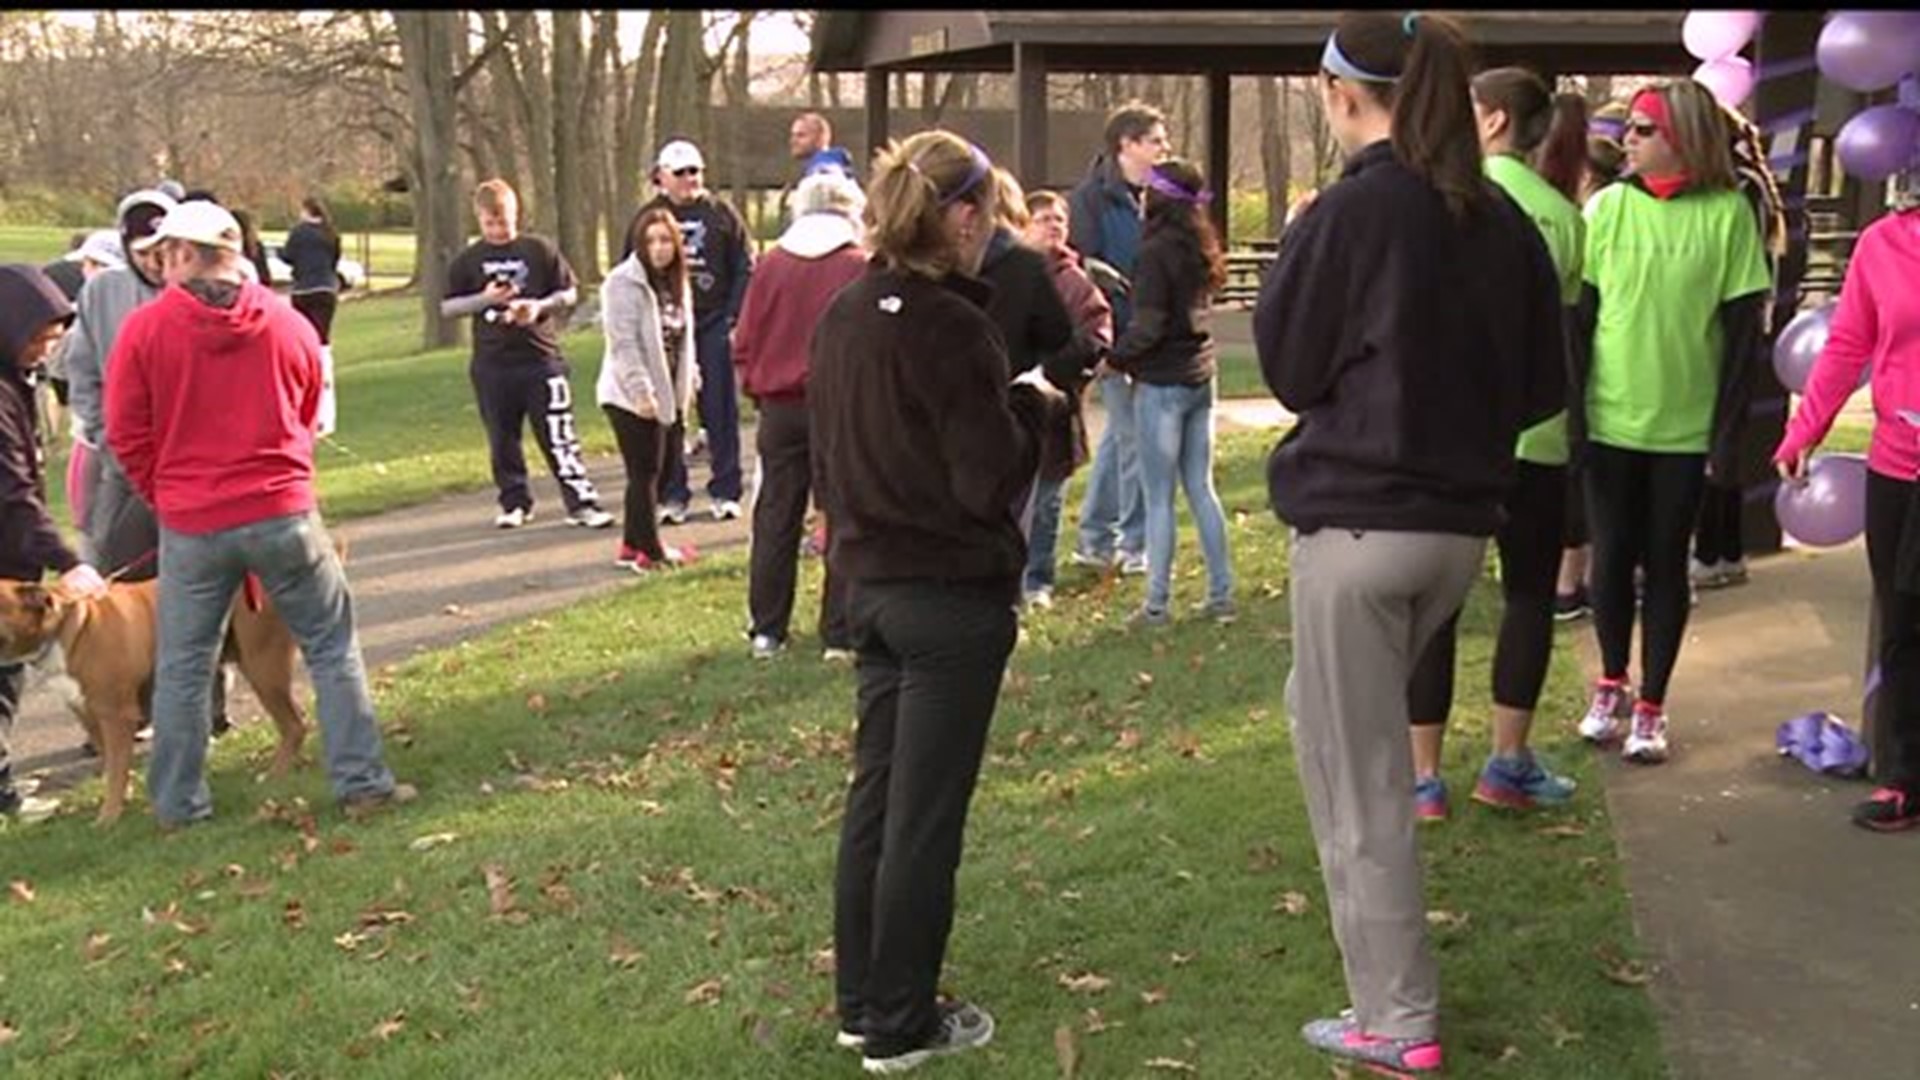 Blinded by Love 5K Run Supports Victims of Domestic Violence